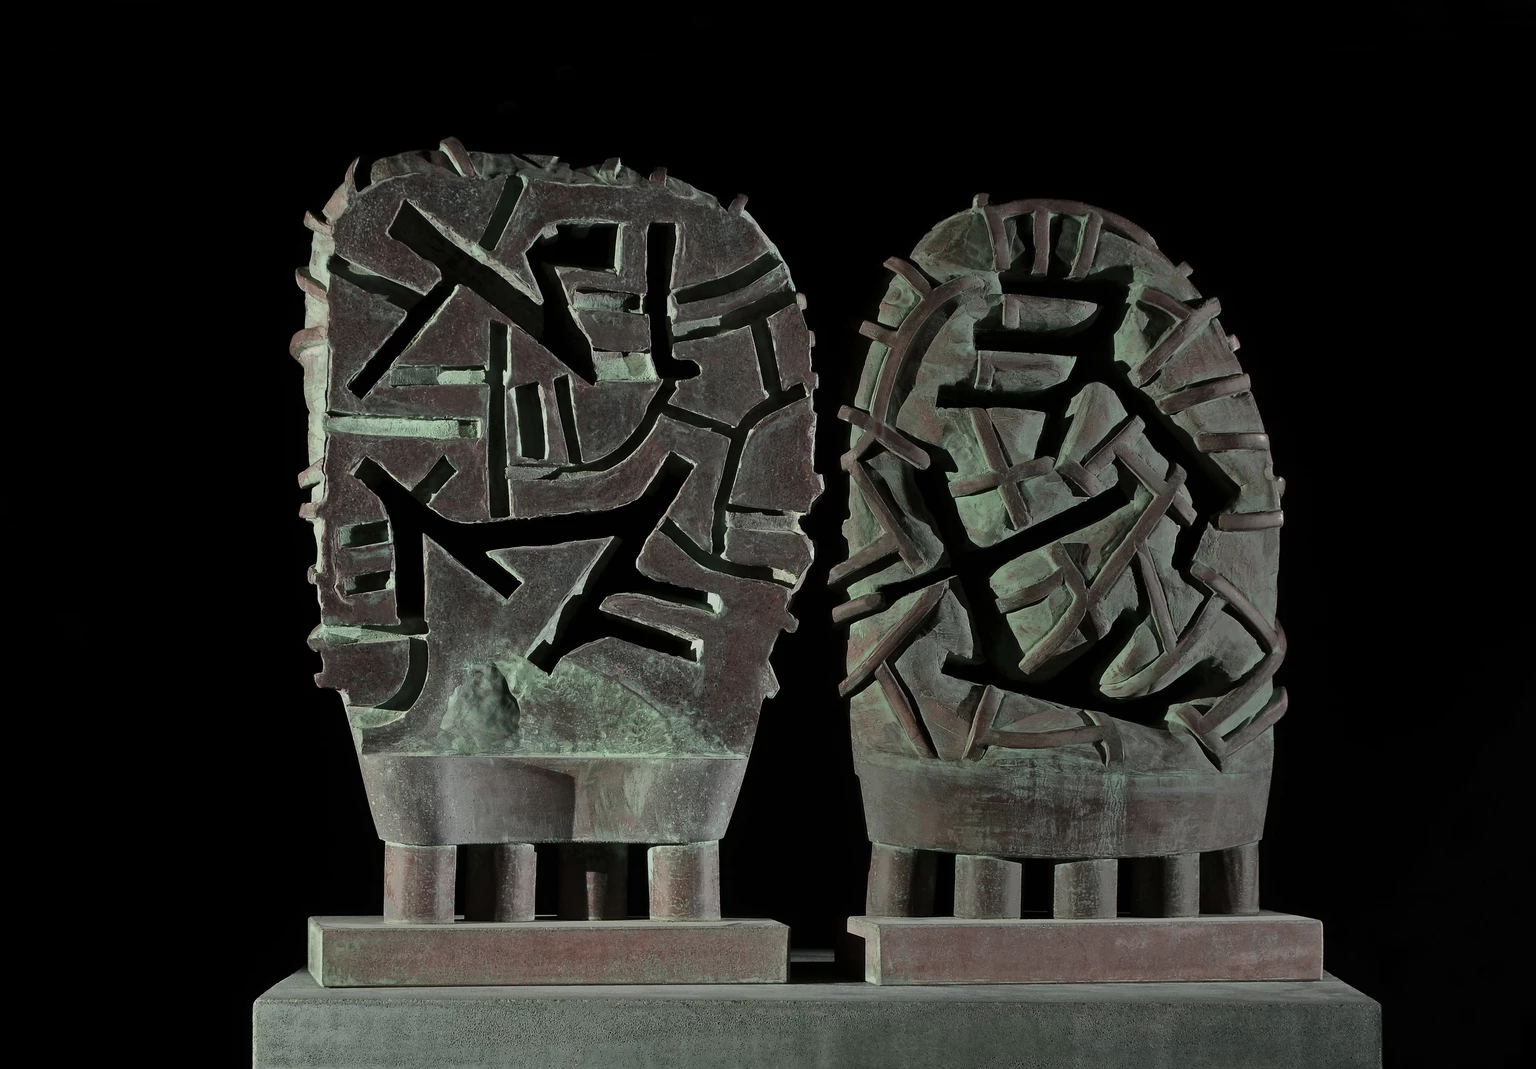 Paired mask, 2001 - colored and painted concrete, 60 x 32.5 x 14 cm, 56 x 32.5 x 14 cm